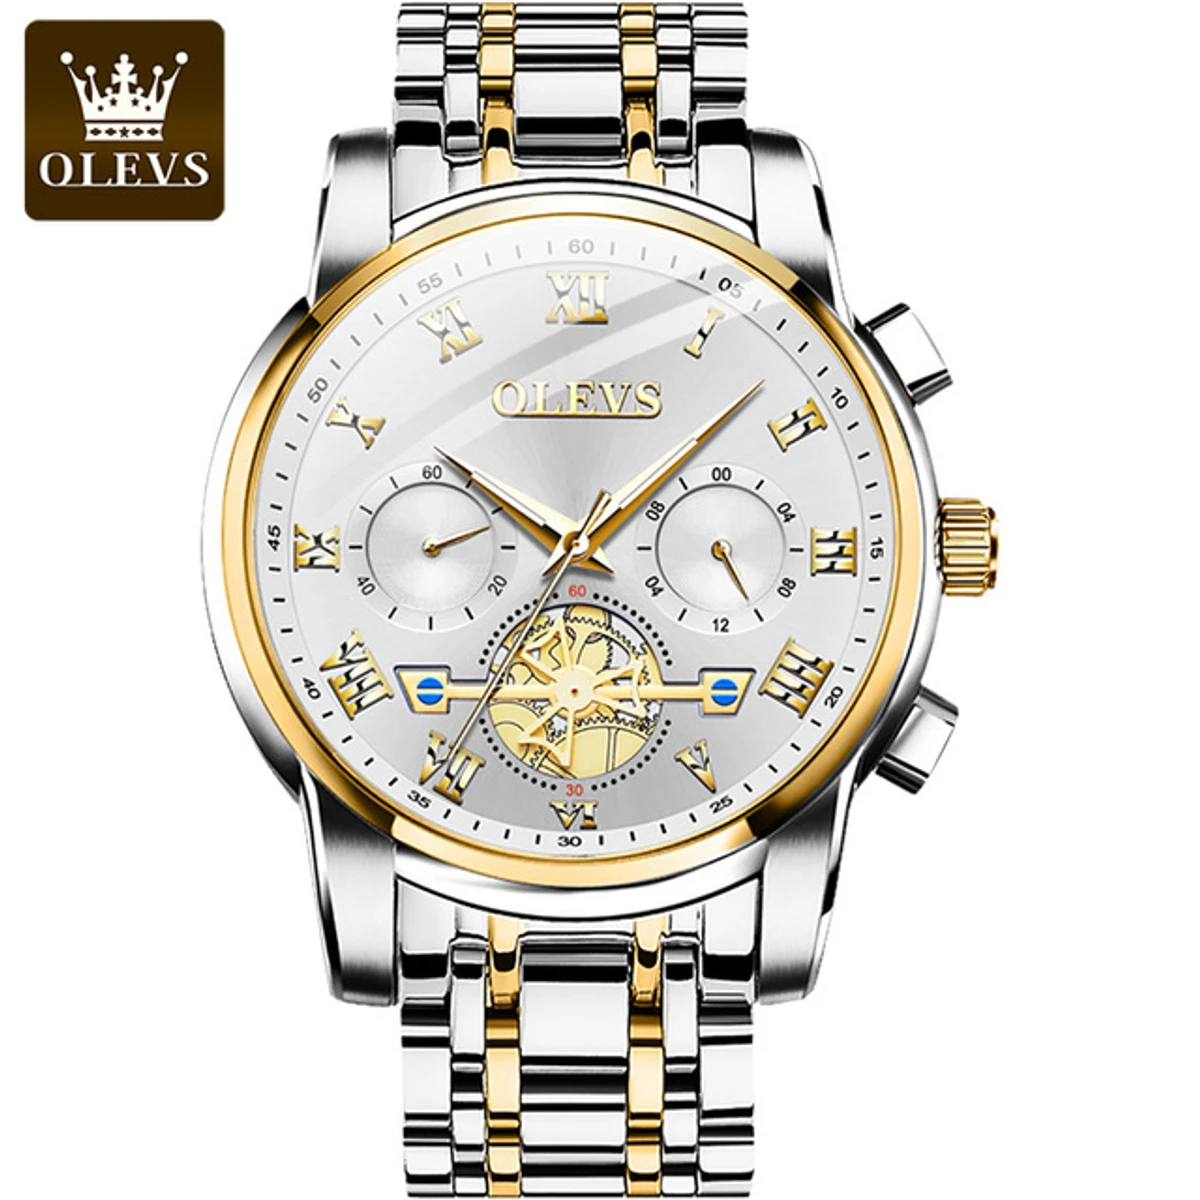 Olevs 2859 Stainless Steel premium quality waterproof Chronograph Watch- Silver & Golden